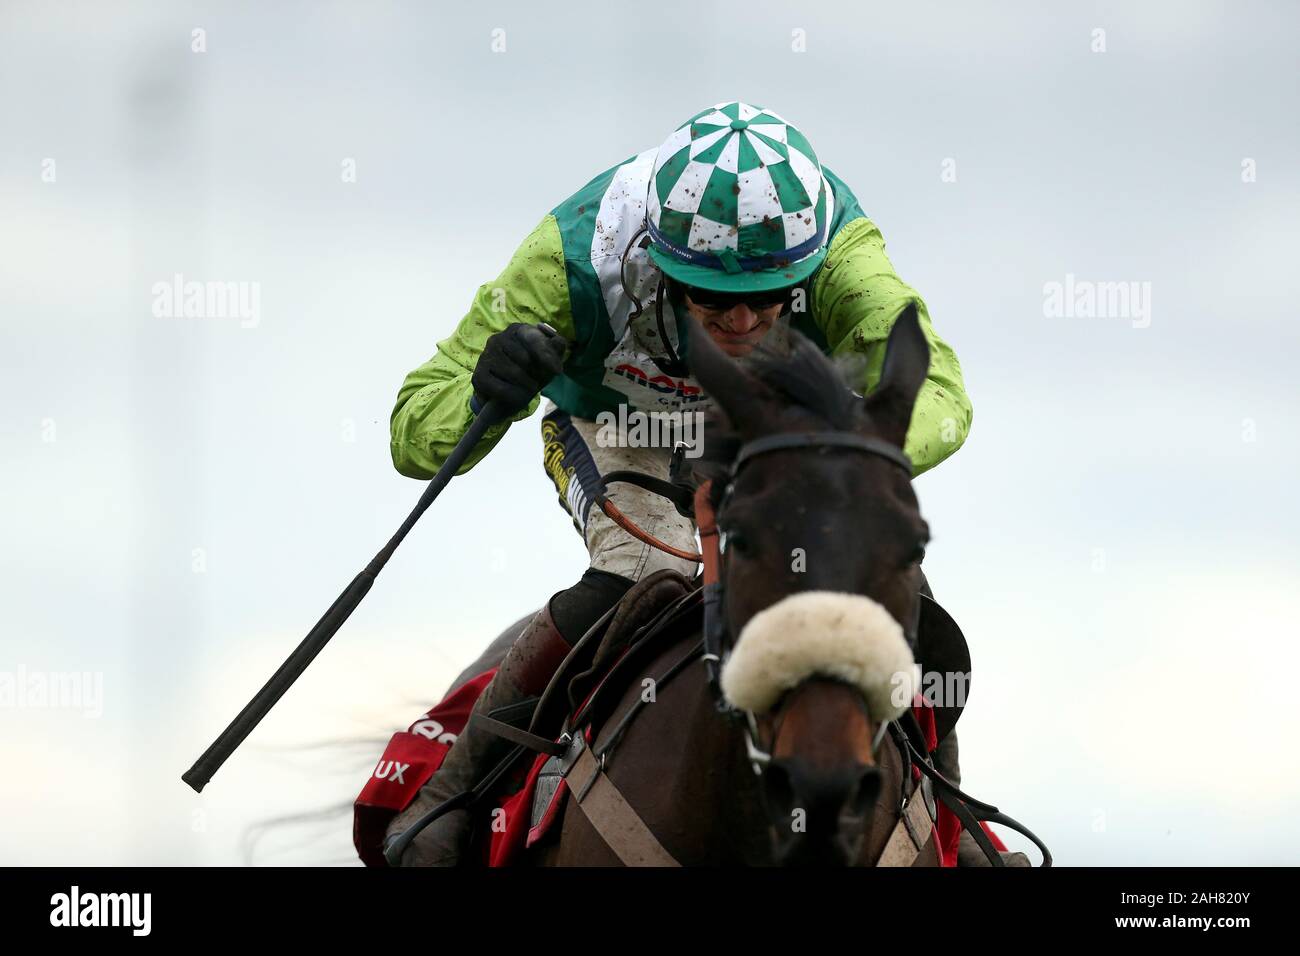 Clan Des Obeaux ridden by jockey Sam Twiston-Davies goes onto win the Ladbrokes King George VI Chase during day one of the Winter Festival at Kempton Park Racecourse. Stock Photo